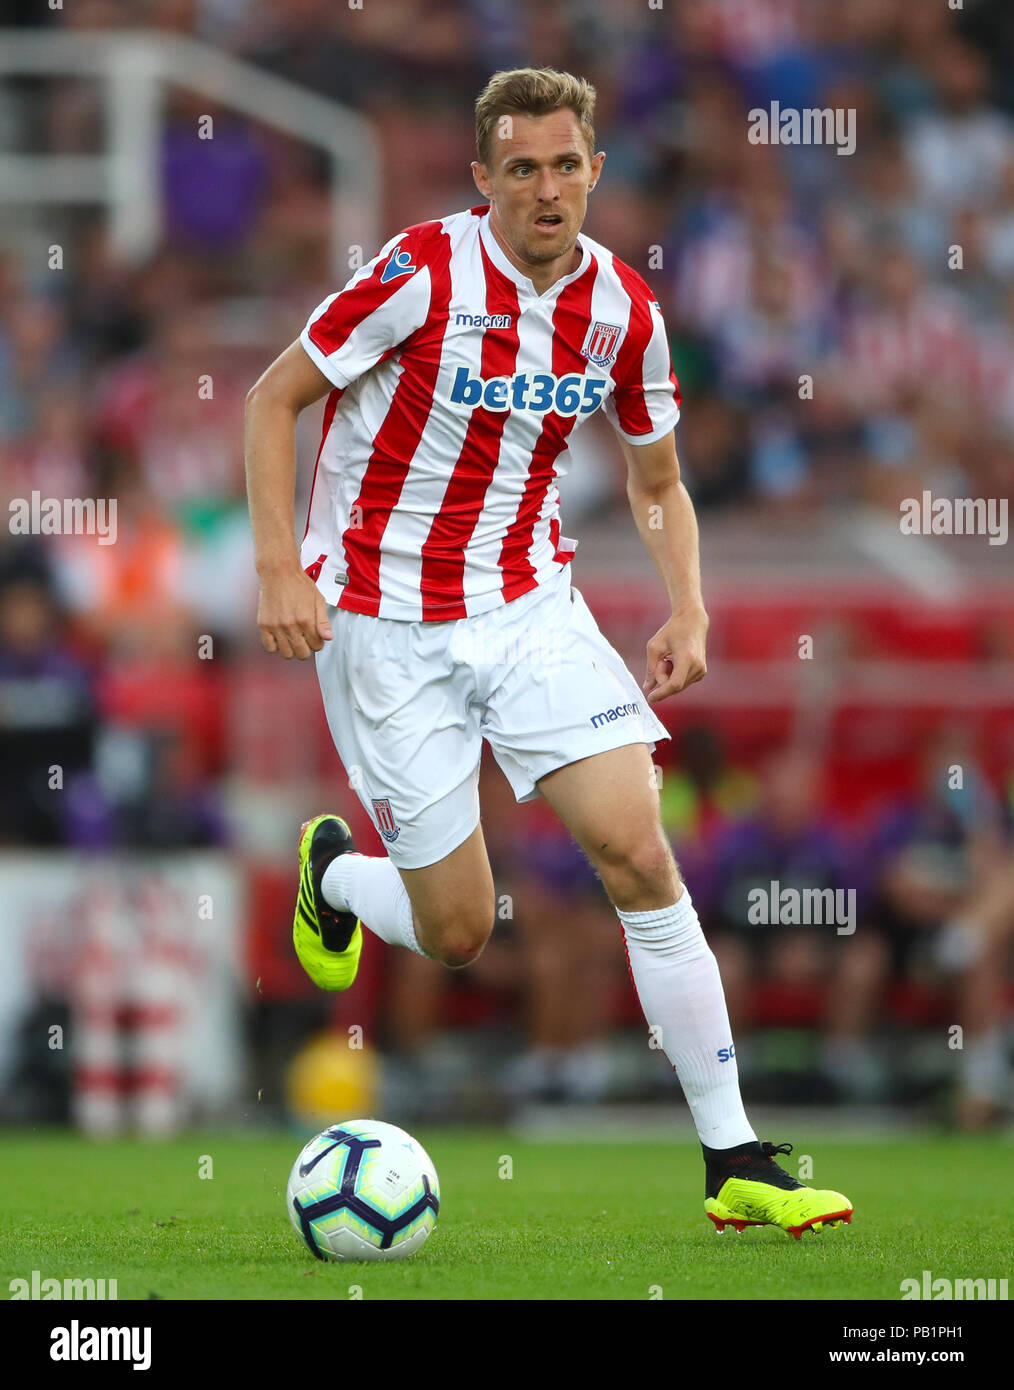 Stoke City's Darren Fletcher during a pre season friendly match at The Bet365 Stadium, Stoke. PRESS ASSOCIATION Photo. Picture date: Wednesday July 25, 2018. Photo credit should read: Nick Potts/PA Wire. EDITORIAL USE ONLY No use with unauthorised audio, video, data, fixture lists, club/league logos or 'live' services. Online in-match use limited to 75 images, no video emulation. No use in betting, games or single club/league/player publications. Stock Photo